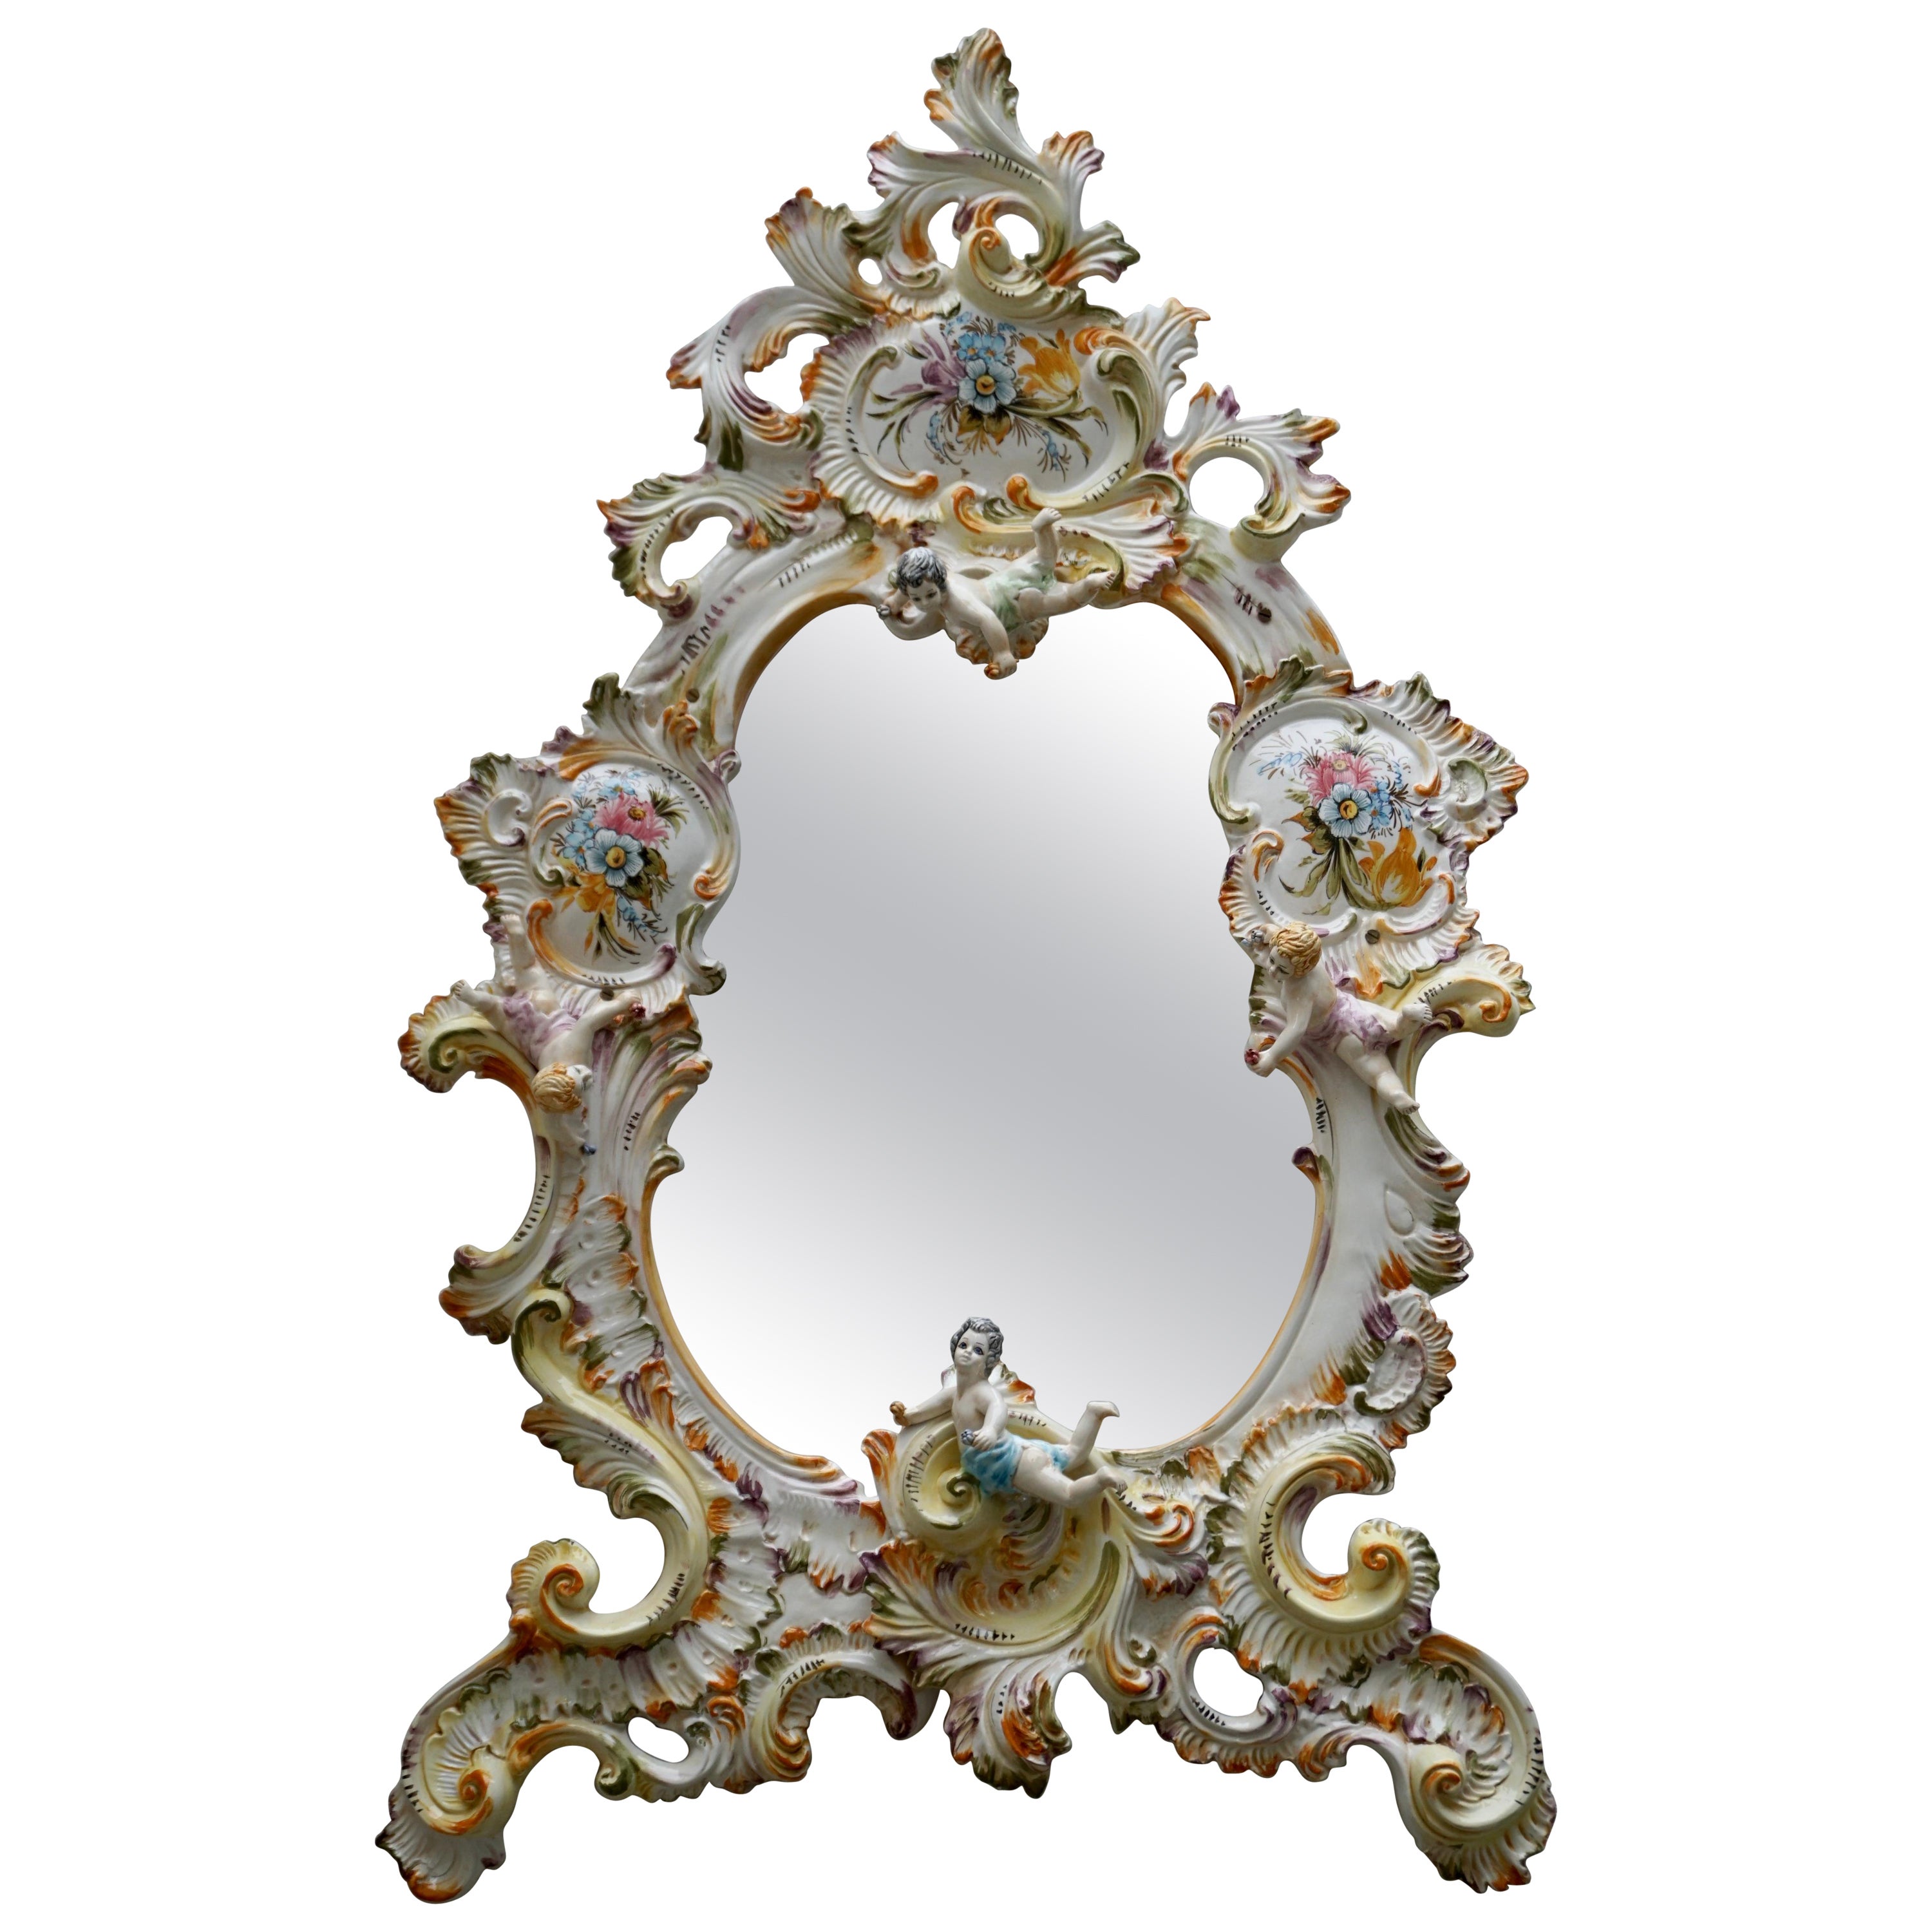 Mid-20th Century Italian Capodimonte Porcelain Mirror with Flowers and Cherubs For Sale